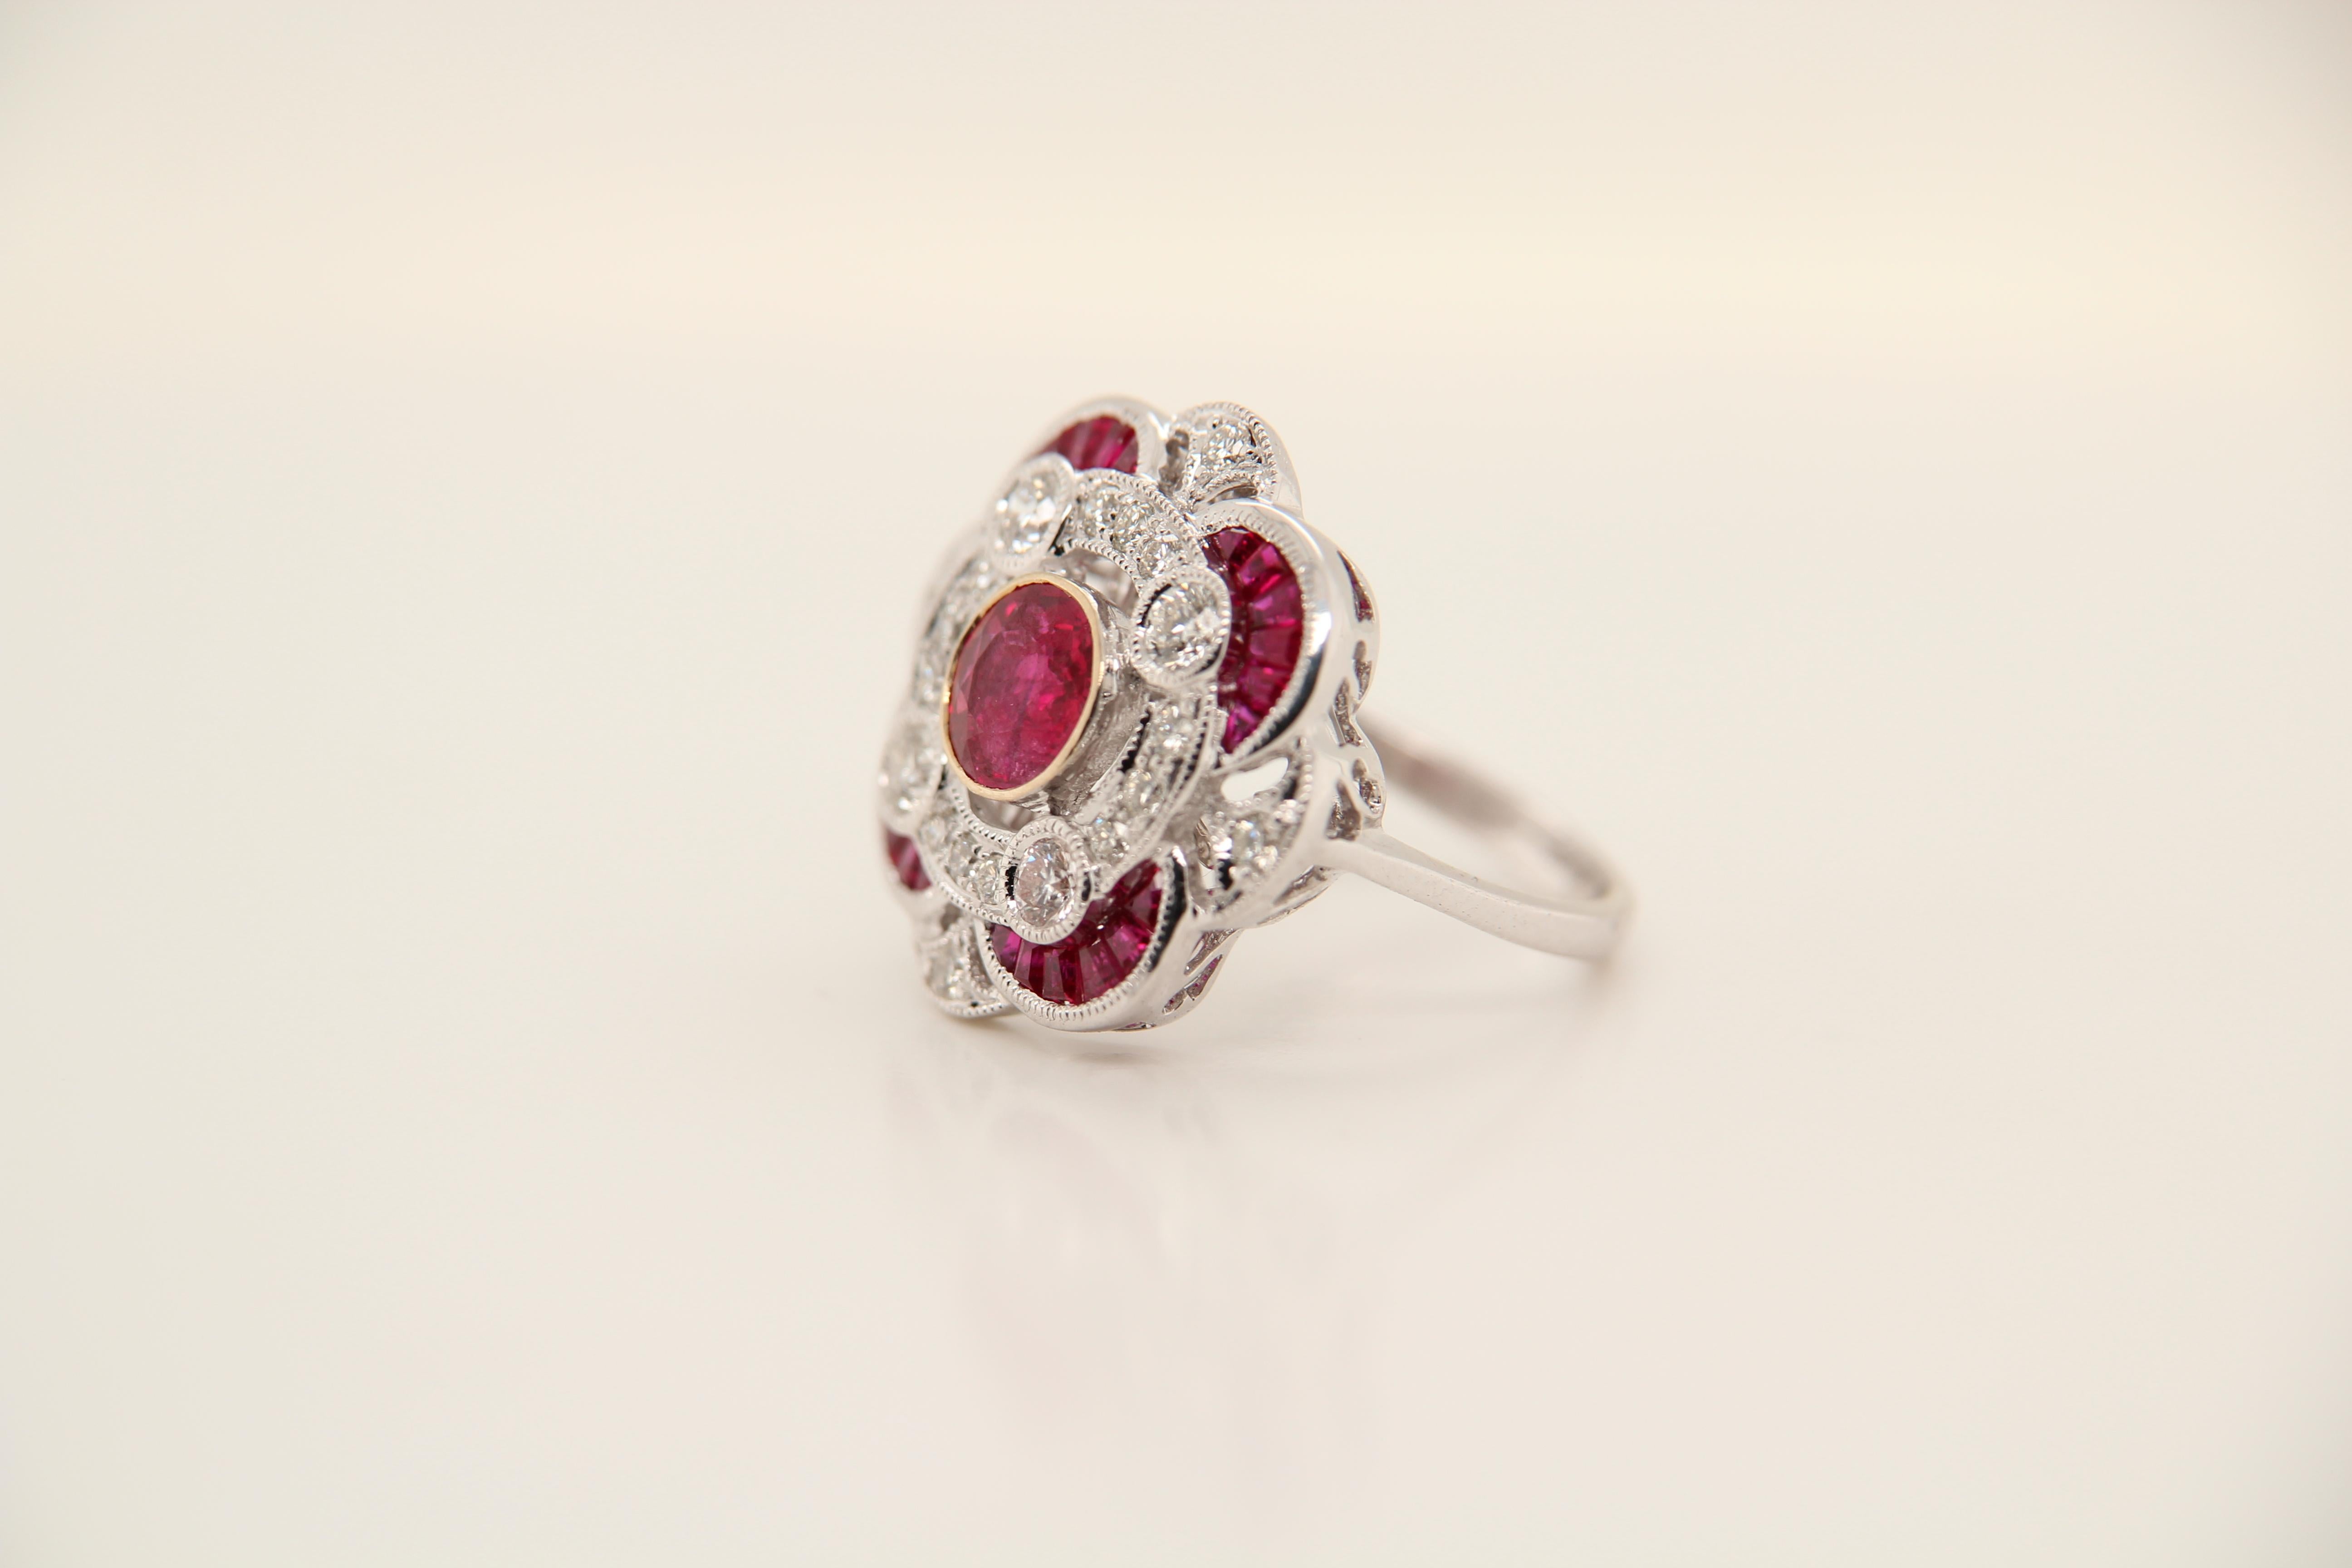 A ruby diamond ring. The center stone ruby is 1.19 Carat from Burma as certified by GRS surrounded by 0.68 Carat tapered shaped rubies and 0.65 Carat round shaped diamonds.  The ring can be resized.